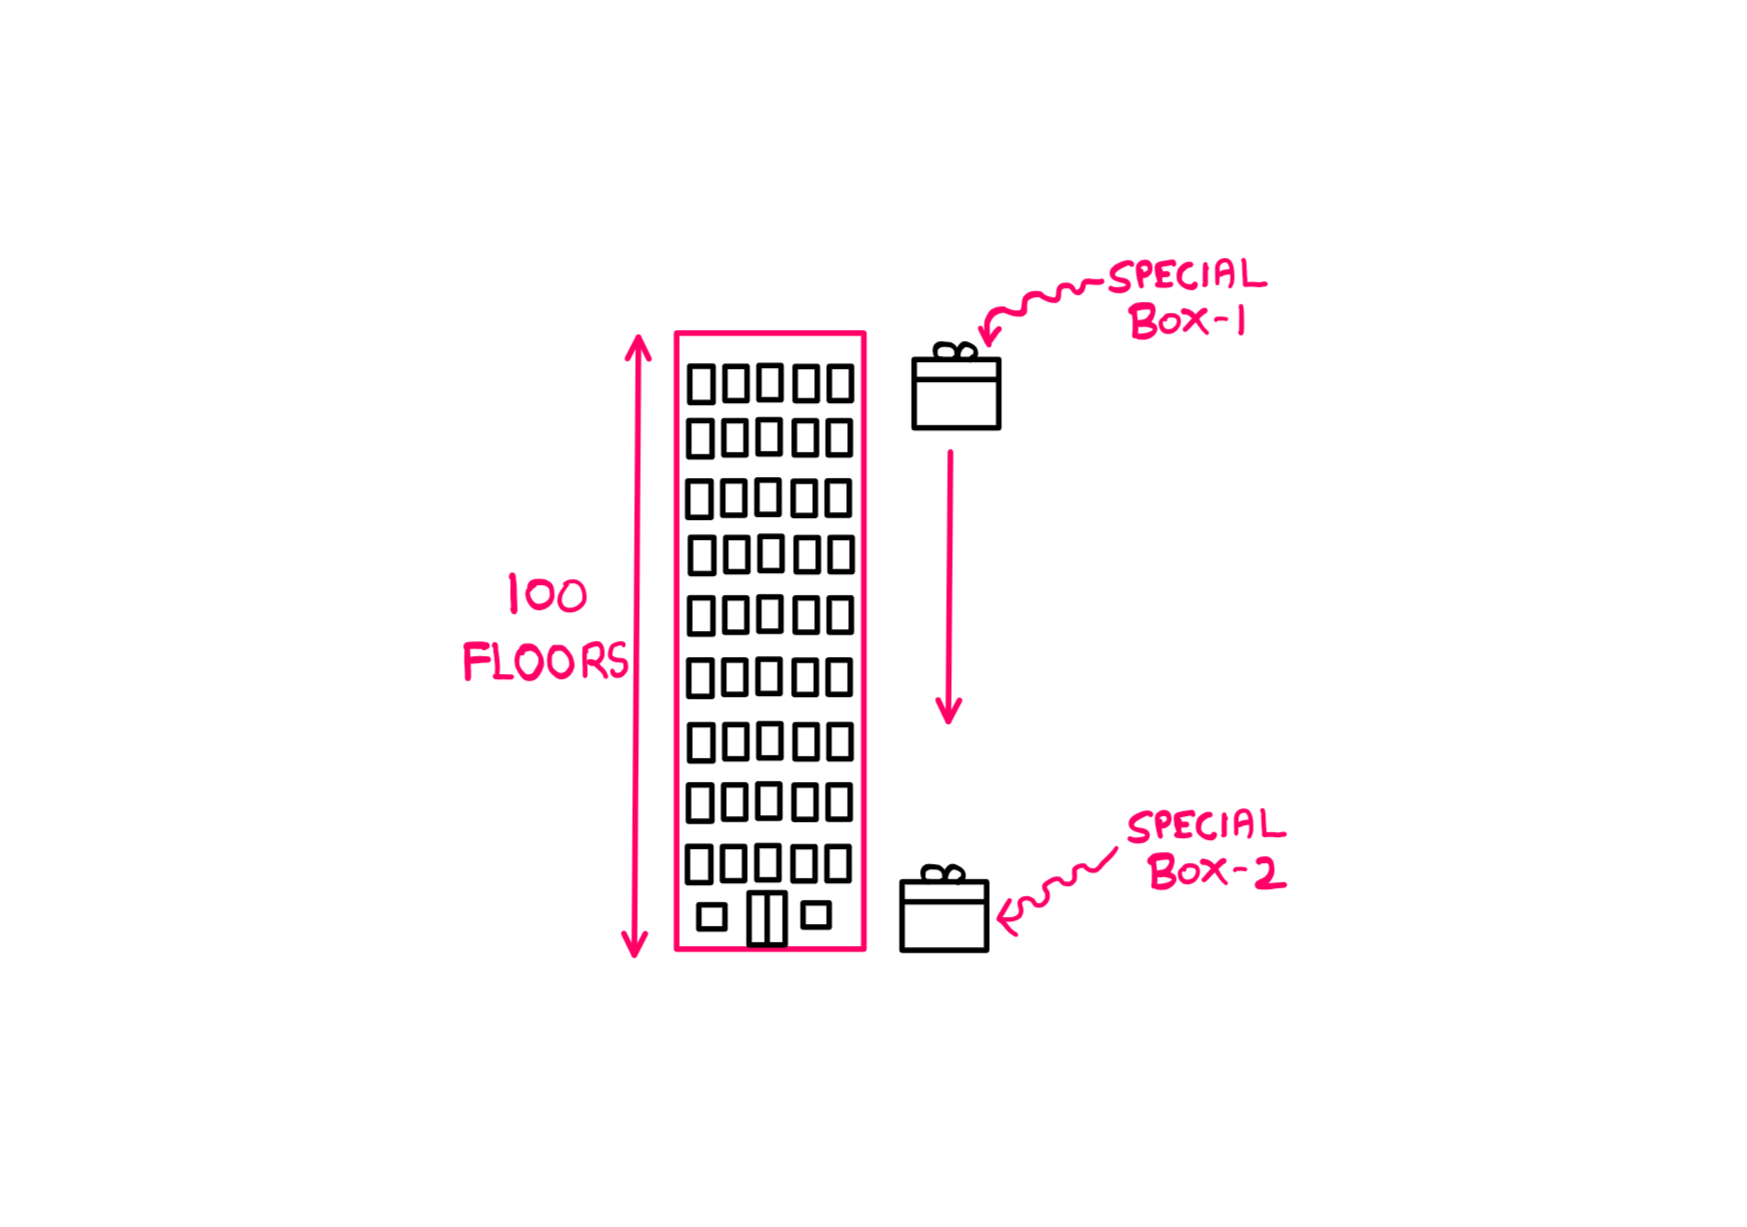 Tricky Logic Puzzle (VII) - How To Really Solve It? - An illustration showing a building with 100 floors on the left. On the right, a special box is dropped from the top of the building. Below, at ground level on the right, you can also see another special box marked "special box 1".